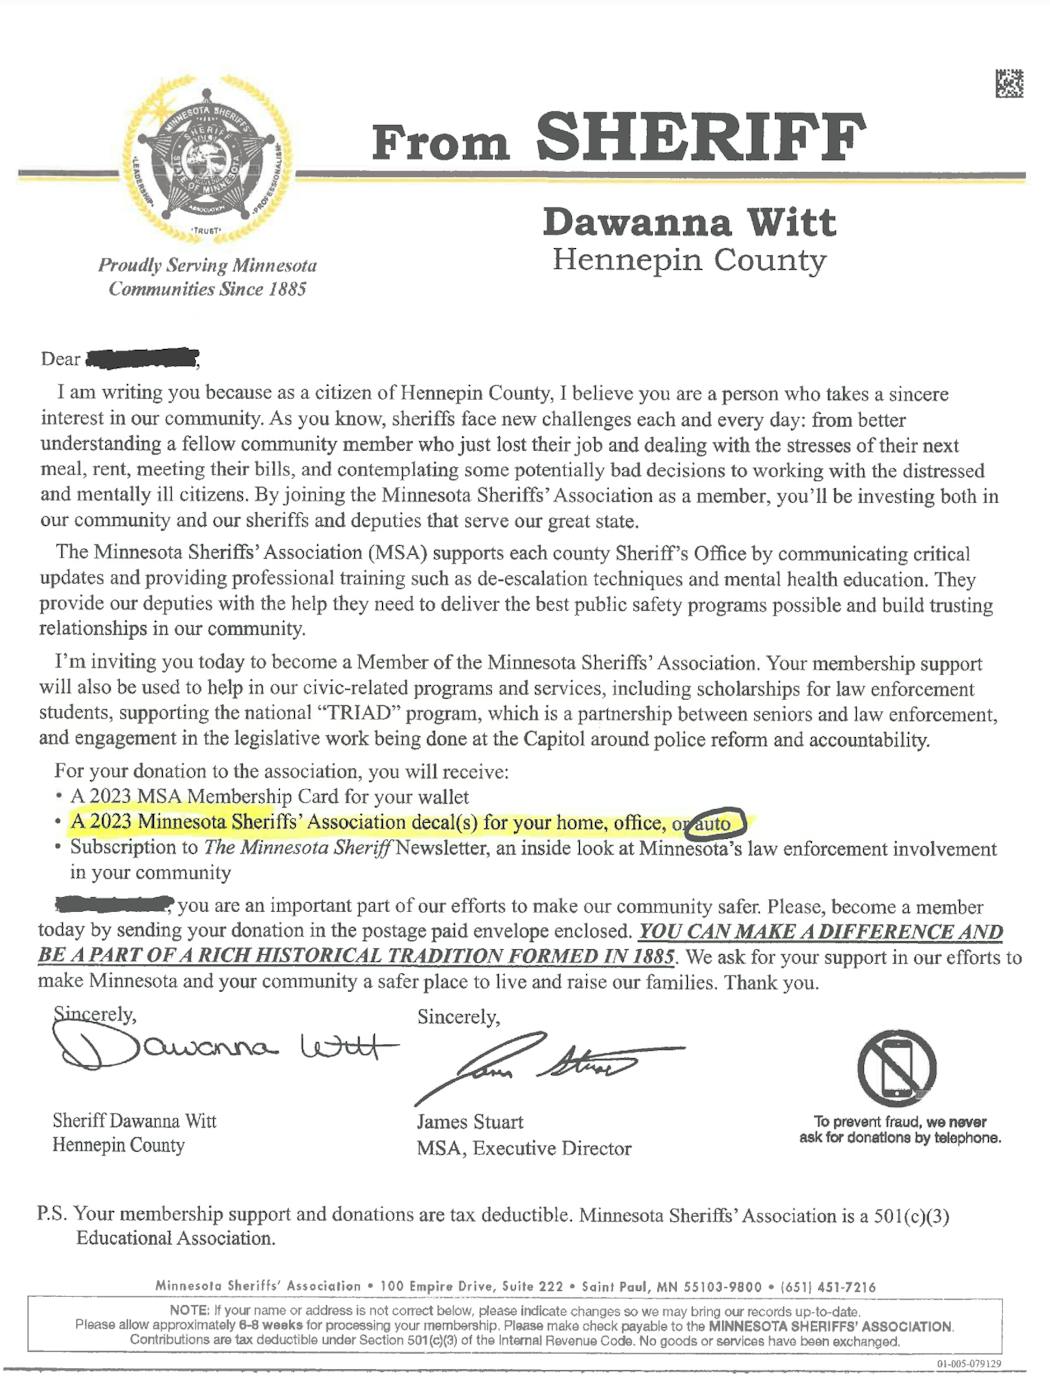 A Minnesota Sheriffs’ Association solicitation letter was received by a Hennepin County resident who highlighted the section about decals offered to donors. The letter shows the format where Hennepin County Sheriff Dawanna Witt’s name was added at the top.